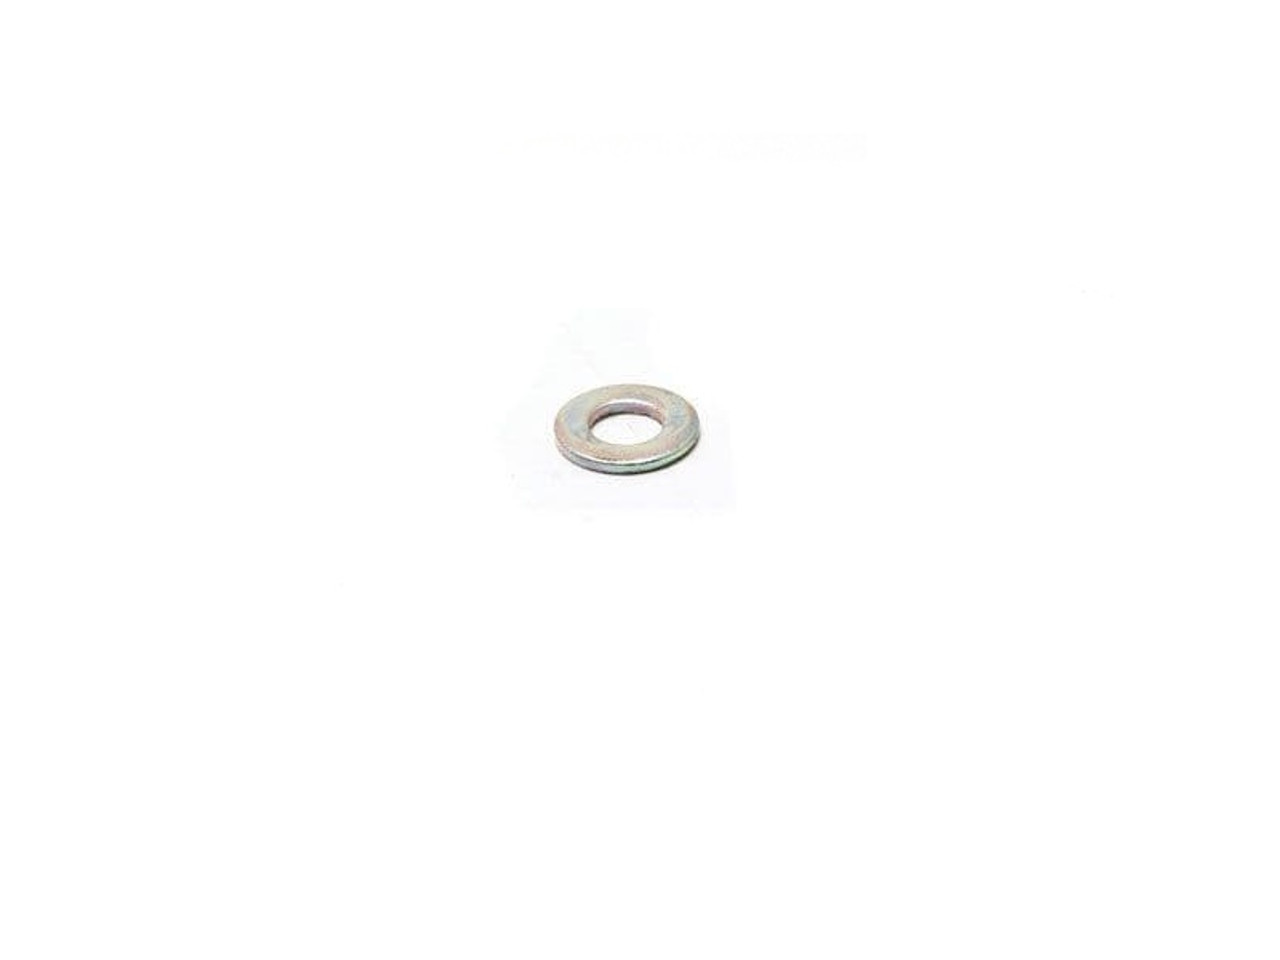 Allmakes 4x4 Defender Power Steering Box Securing Washer - WA112081L